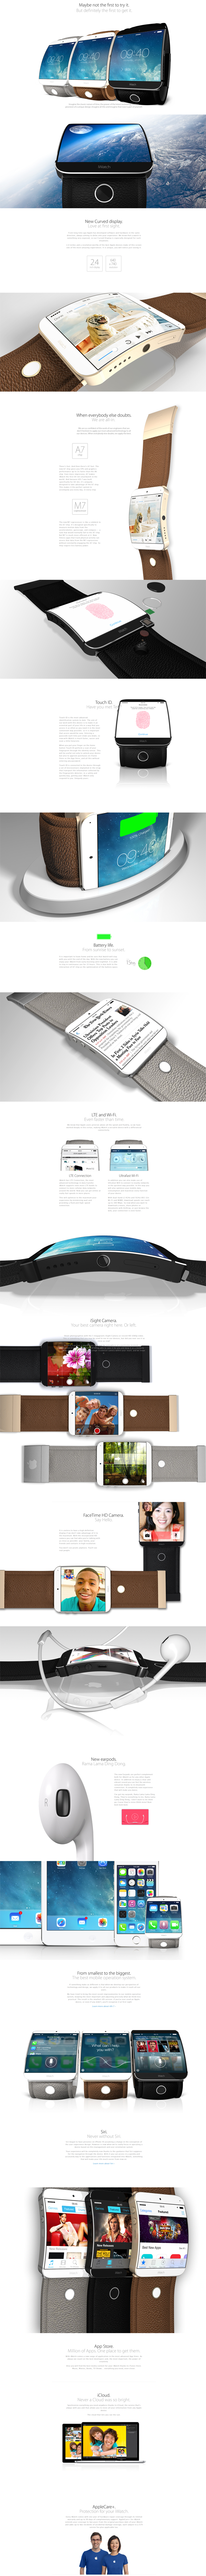 iWatch-2.png